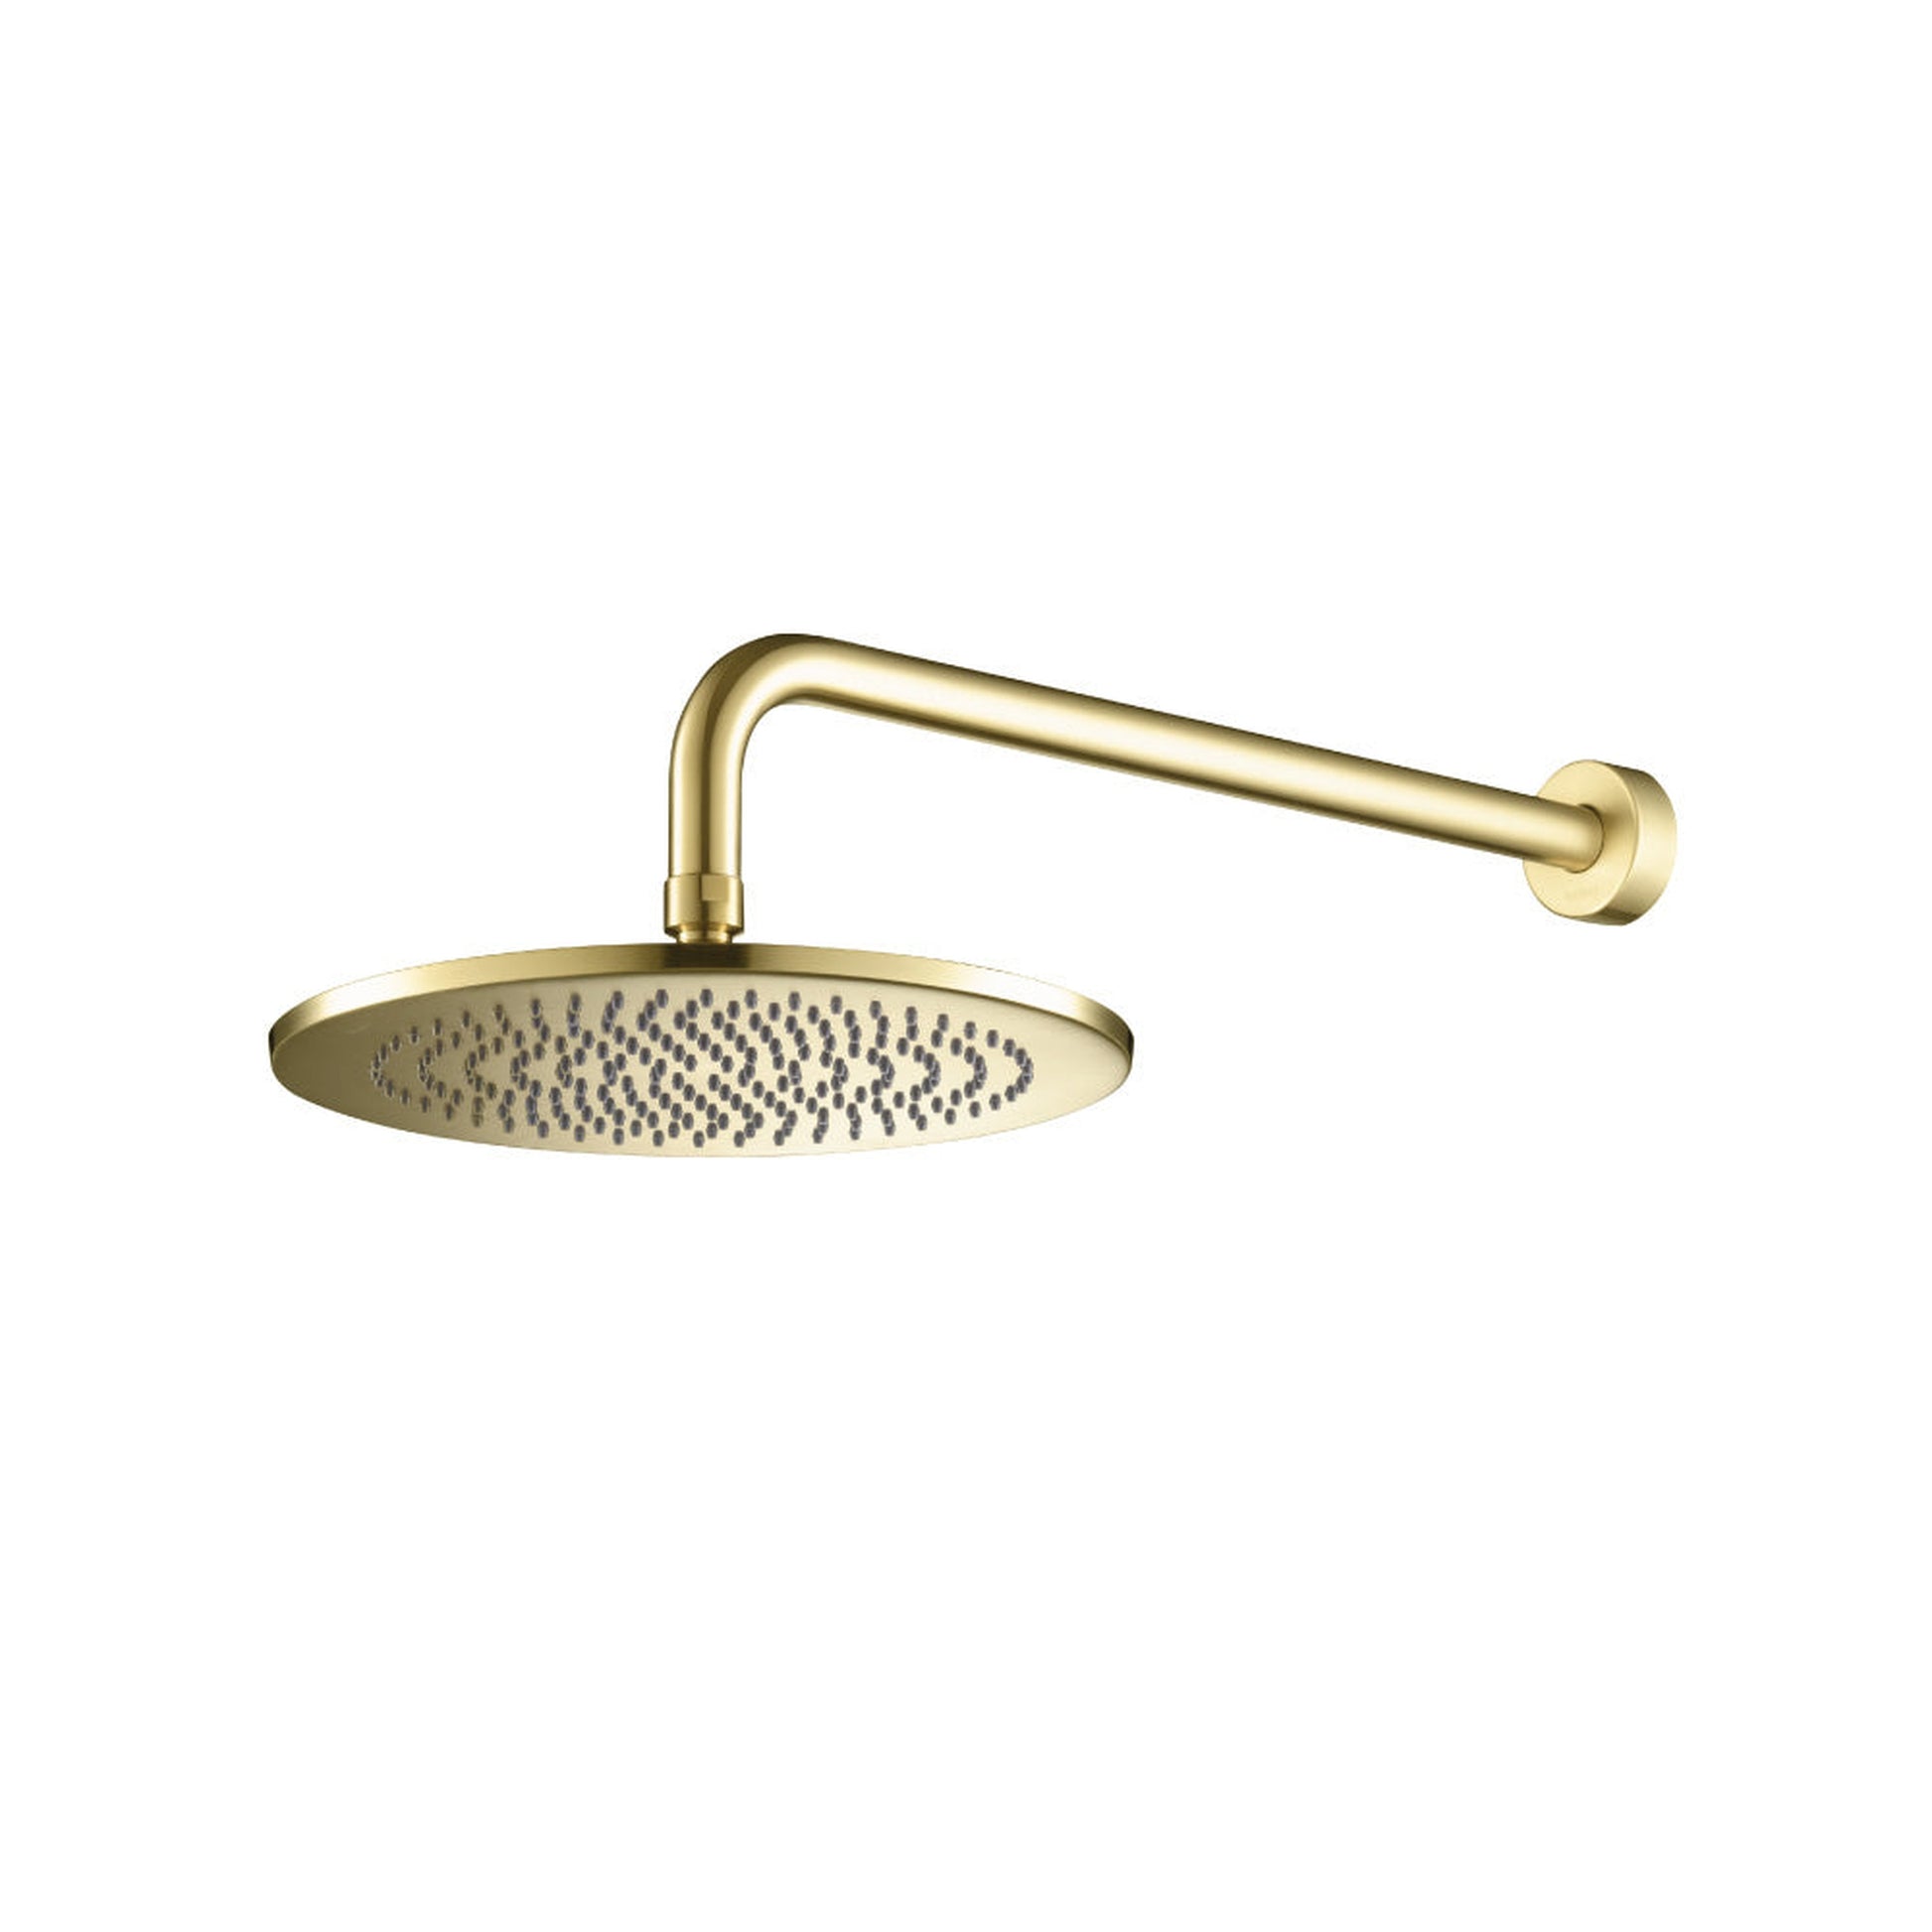 Isenberg Universal Fixtures 10" Single Function Round Satin Brass PVD Solid Brass Rain Shower Head With 15" Wall Mounted Shower Arm